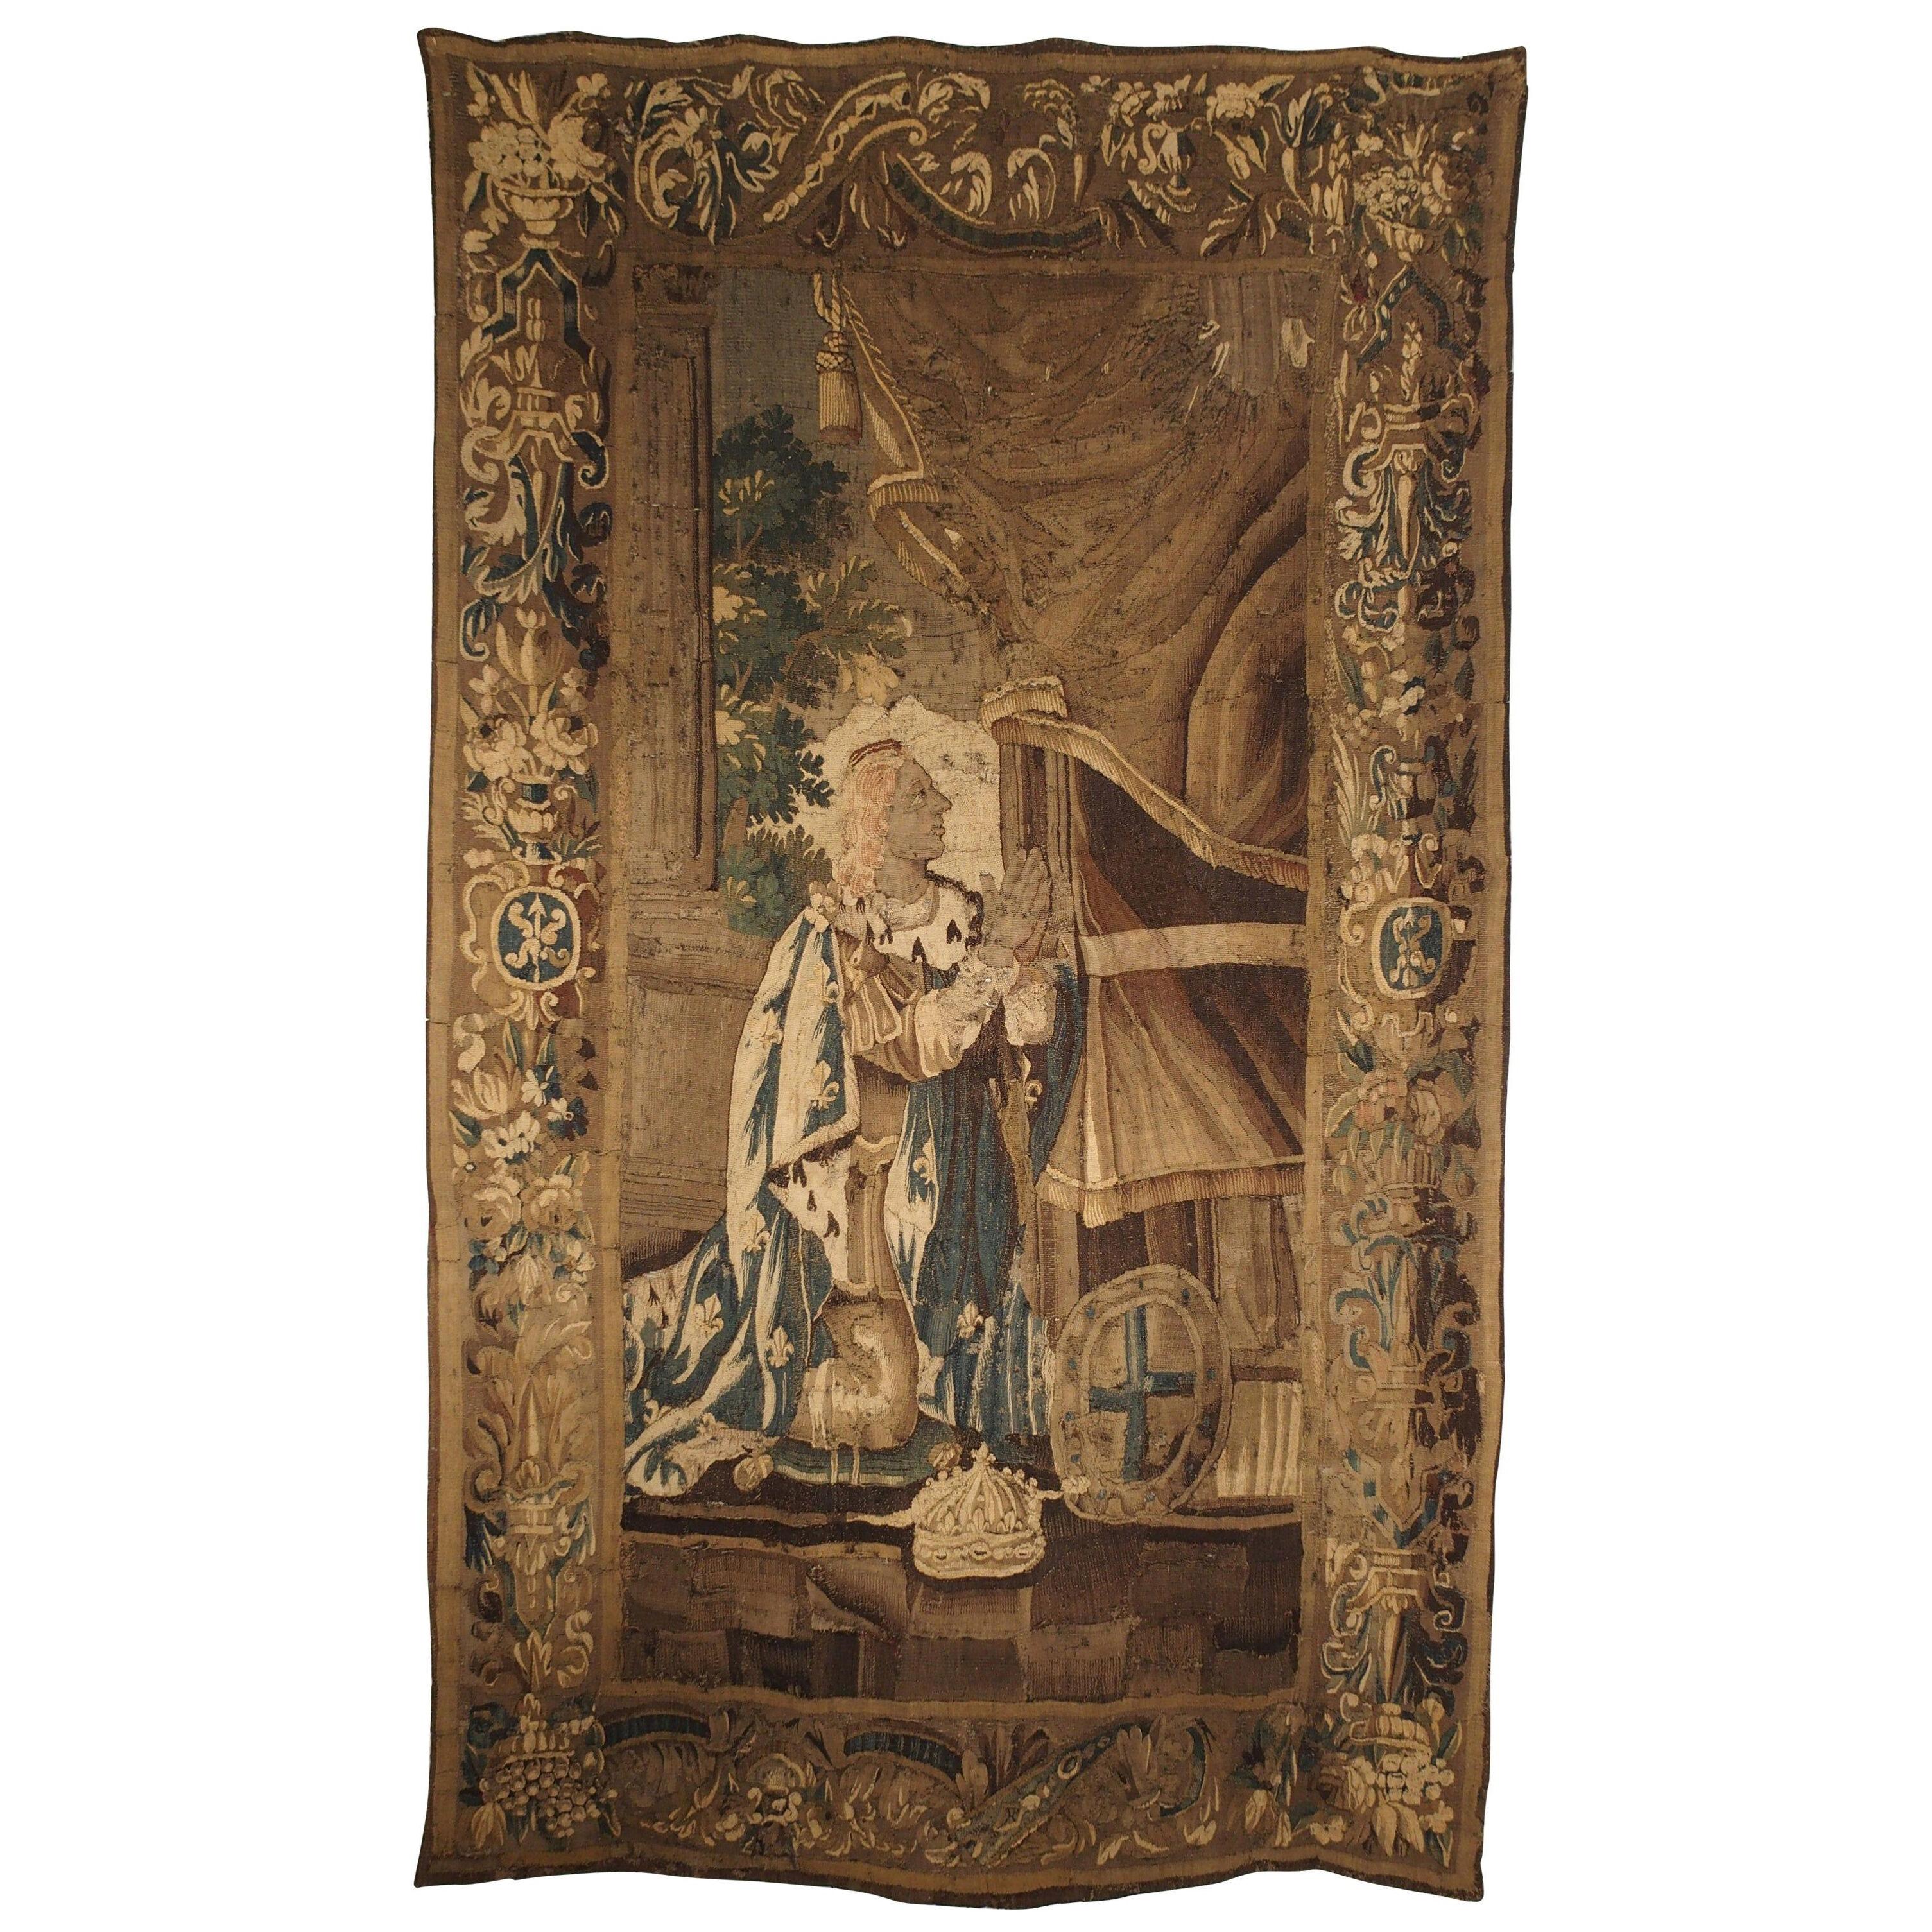 French Aubusson Tapestry Depicting the Coronation of a King, circa 1600